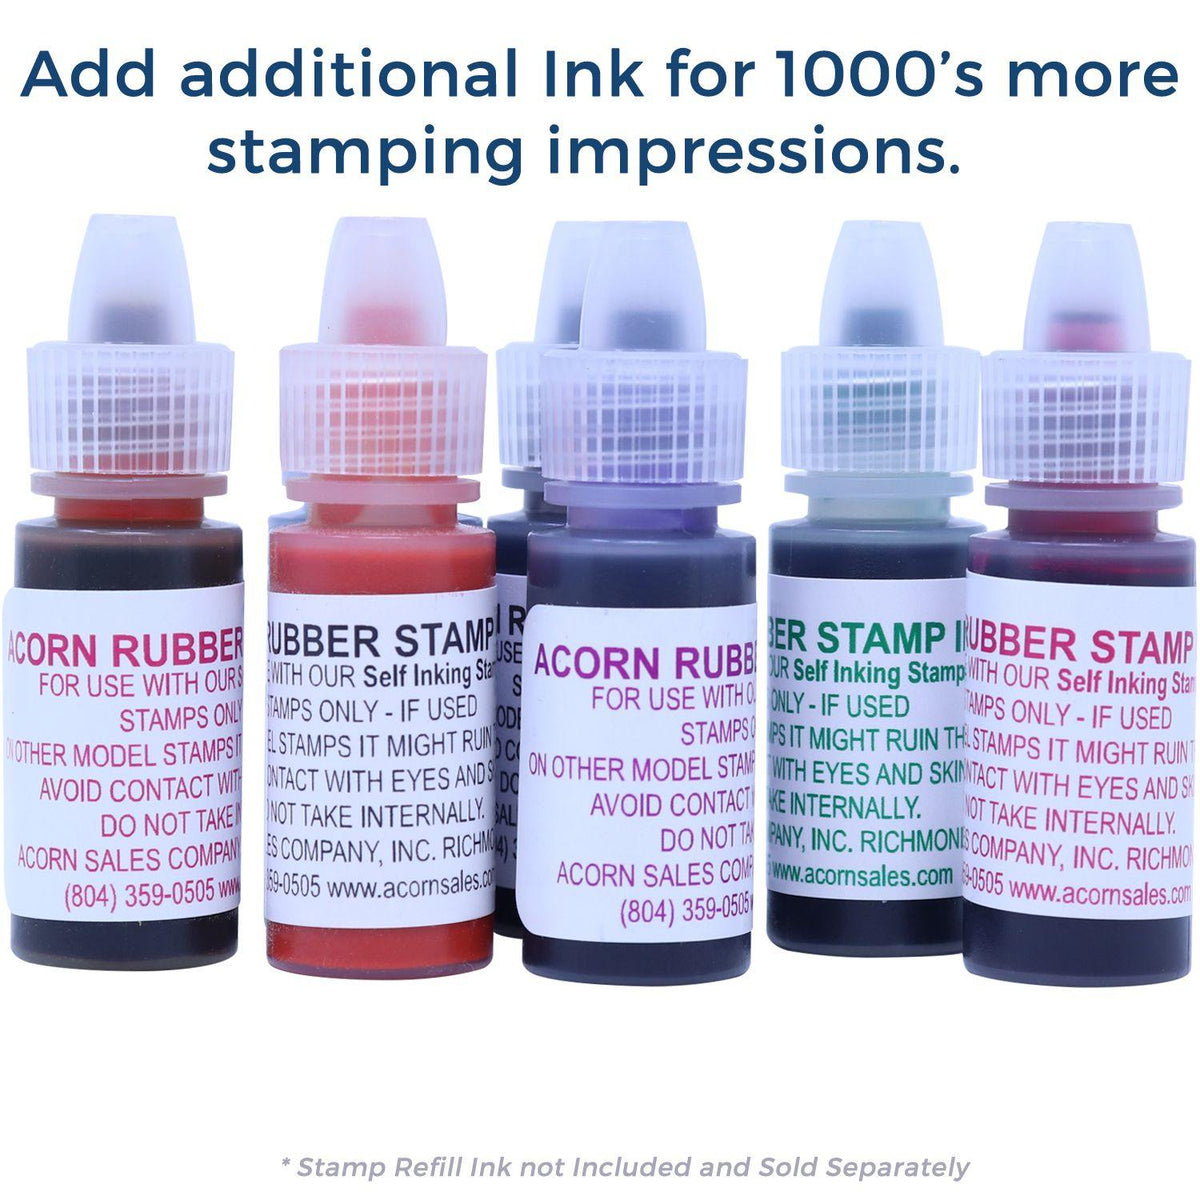 Refill Inks for Large Pre-Inked Temporarily Away Stamp Available